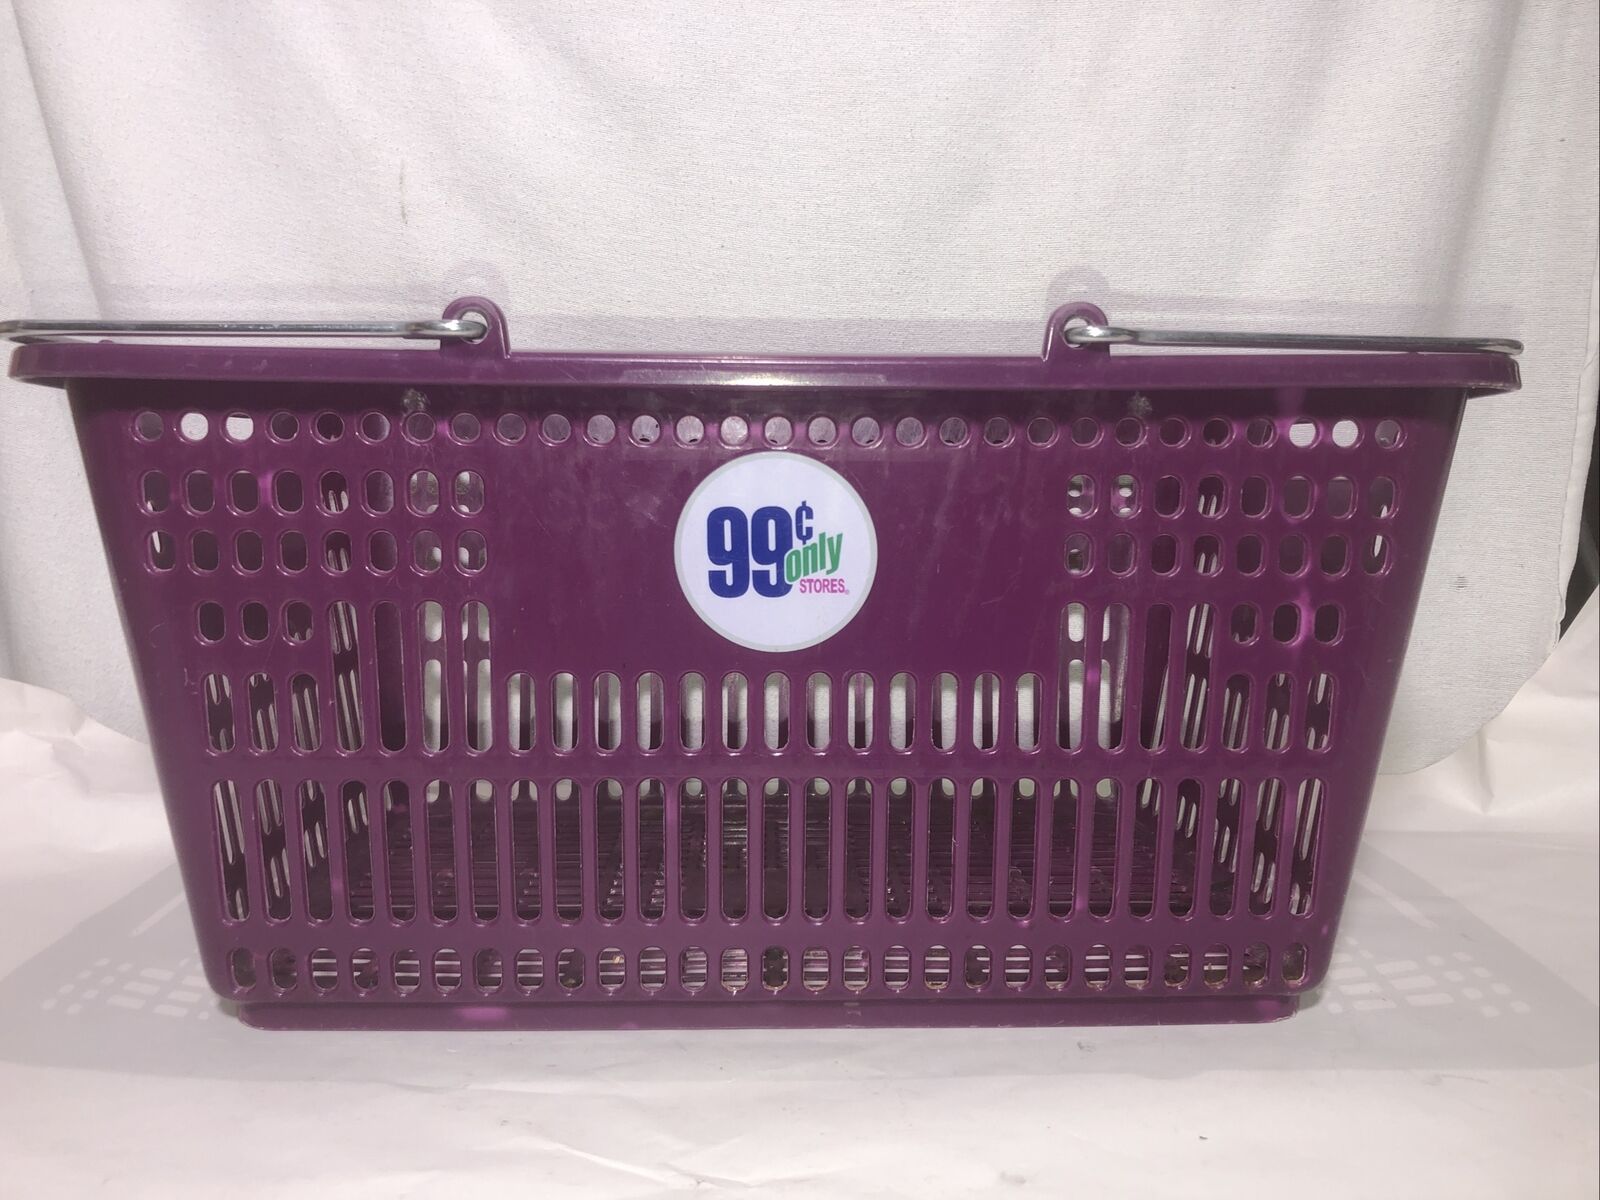 99 CENTS ONLY STORE - RARE Shopping HAND BASKET USED